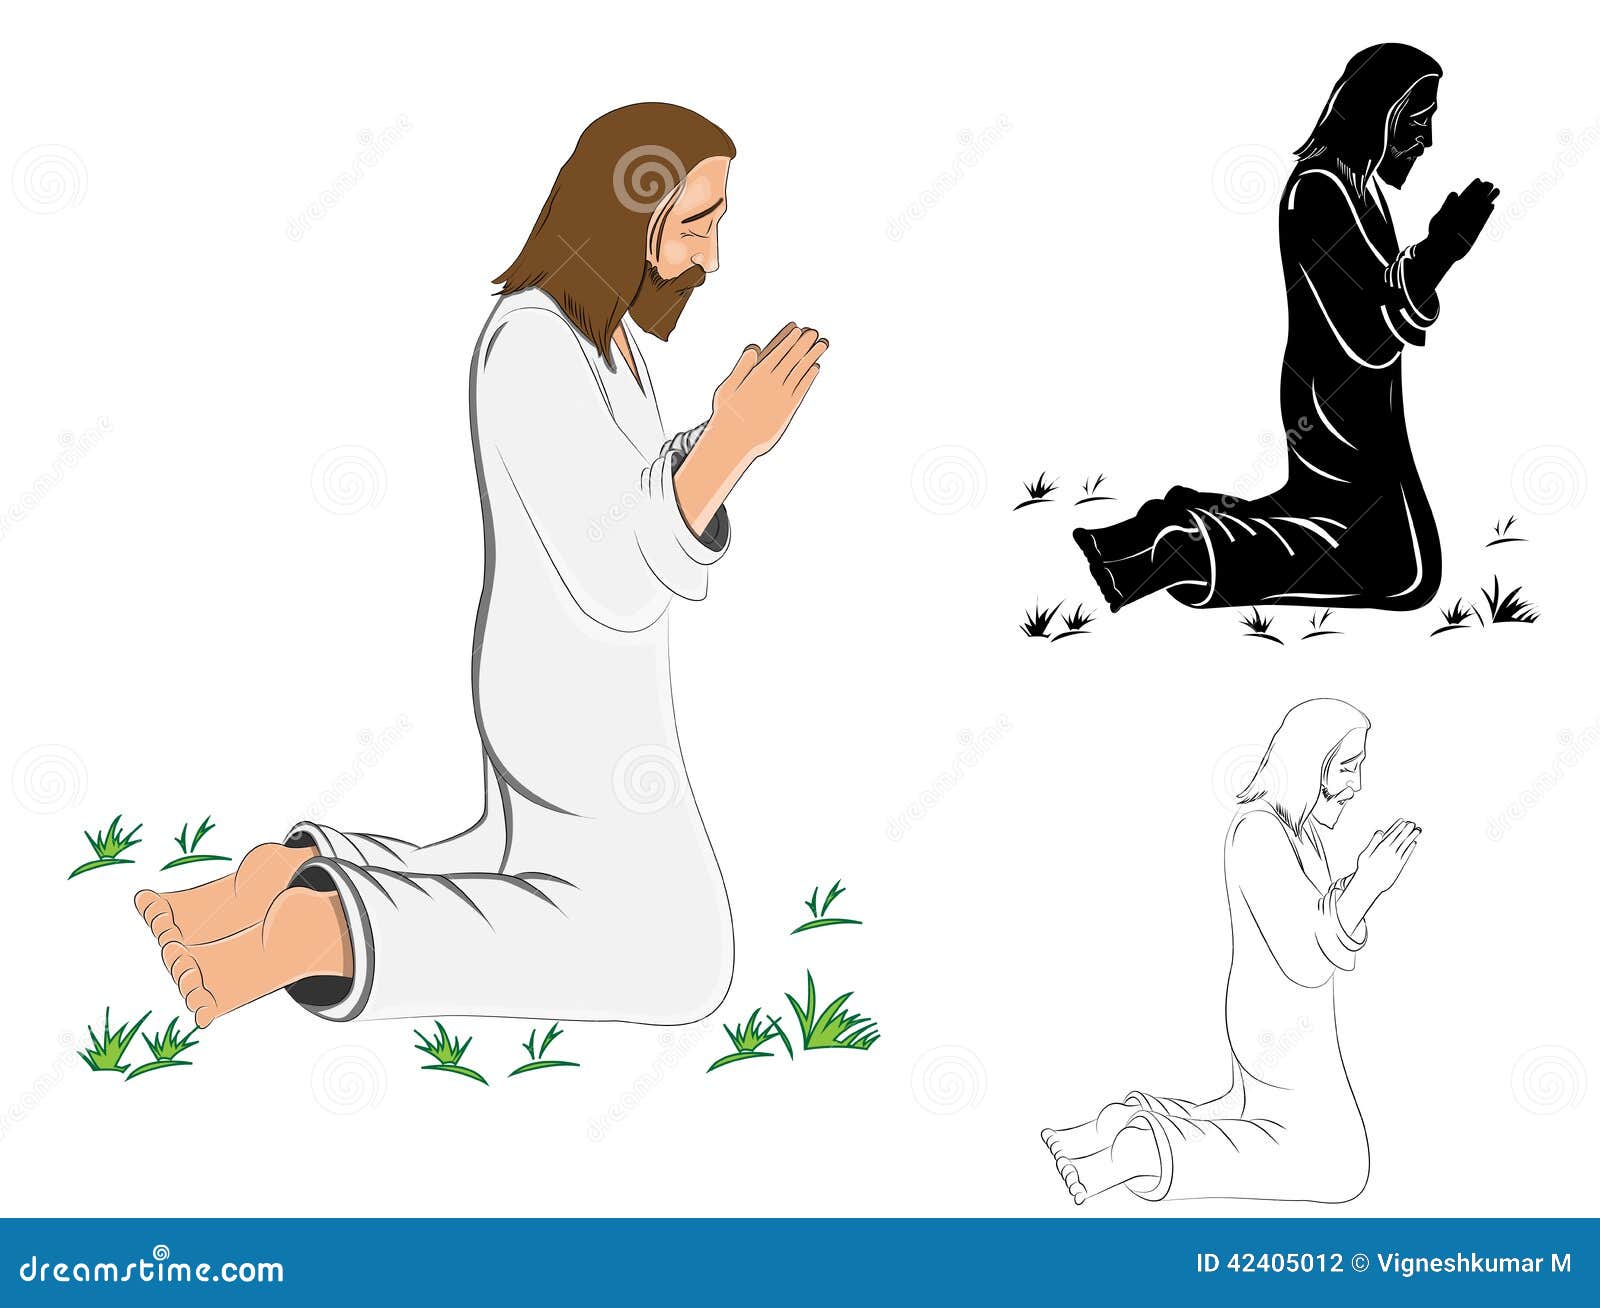 free clipart of jesus praying in the garden - photo #9